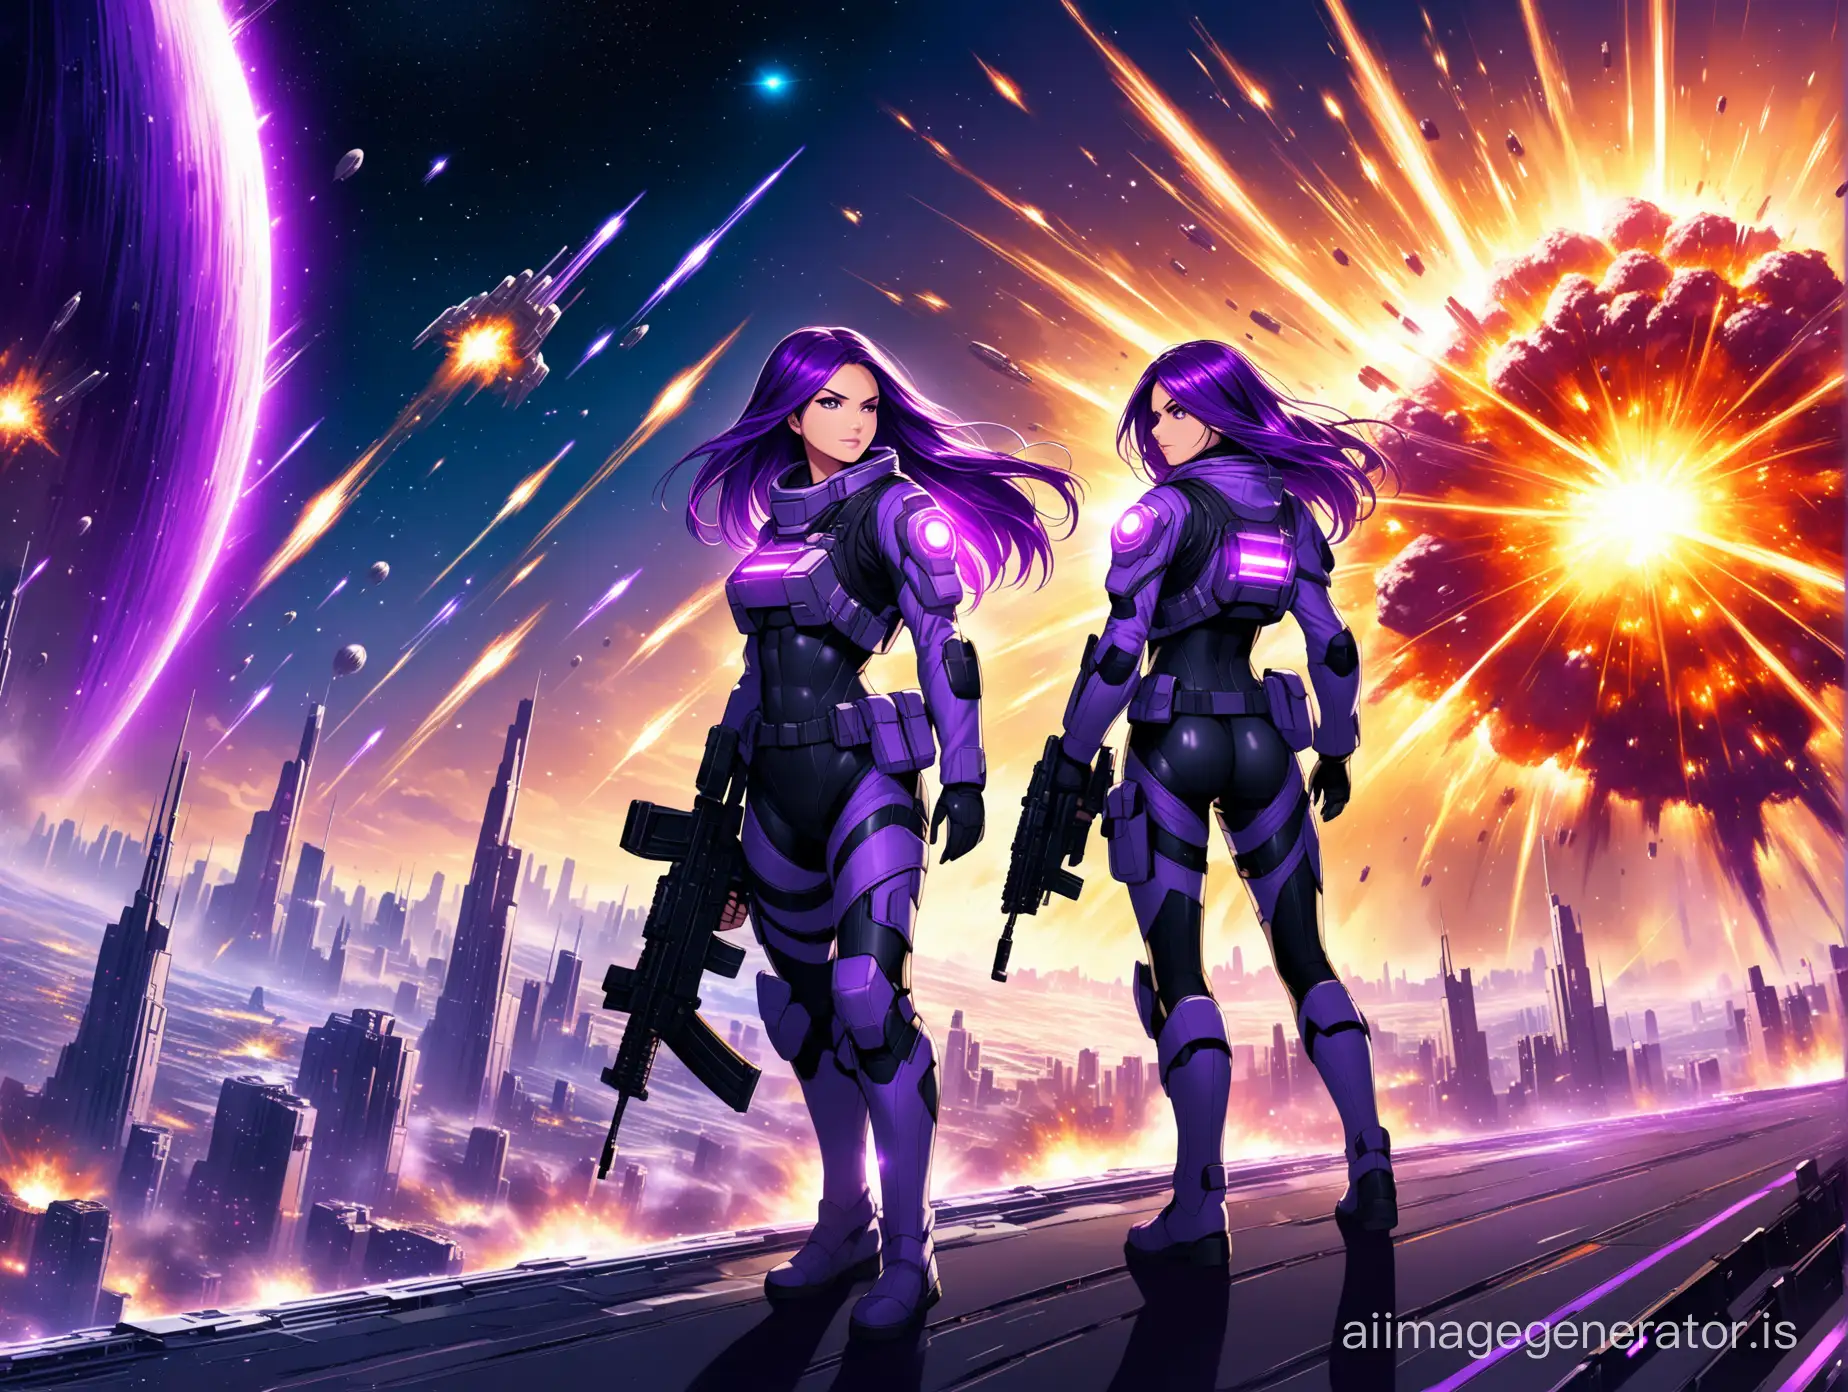 Futuristic-PurpleHaired-Female-Soldier-in-Epic-Space-War-Explosion